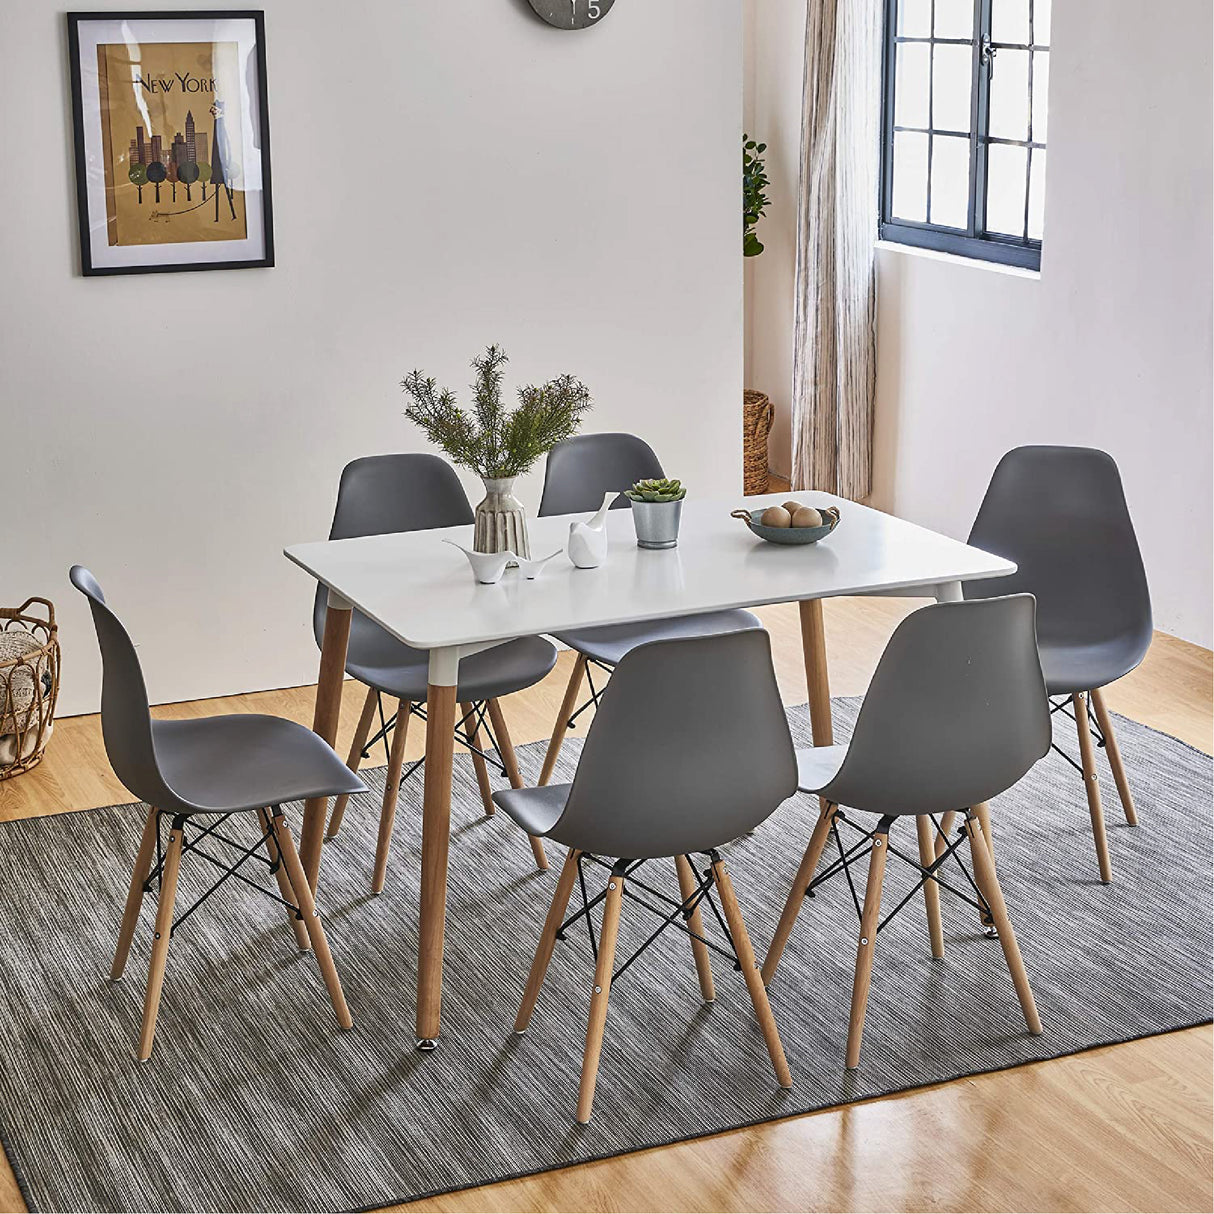 DWS 6 Chairs Rectangular Dining Table Set ( Grey Chairs & White Table Top )